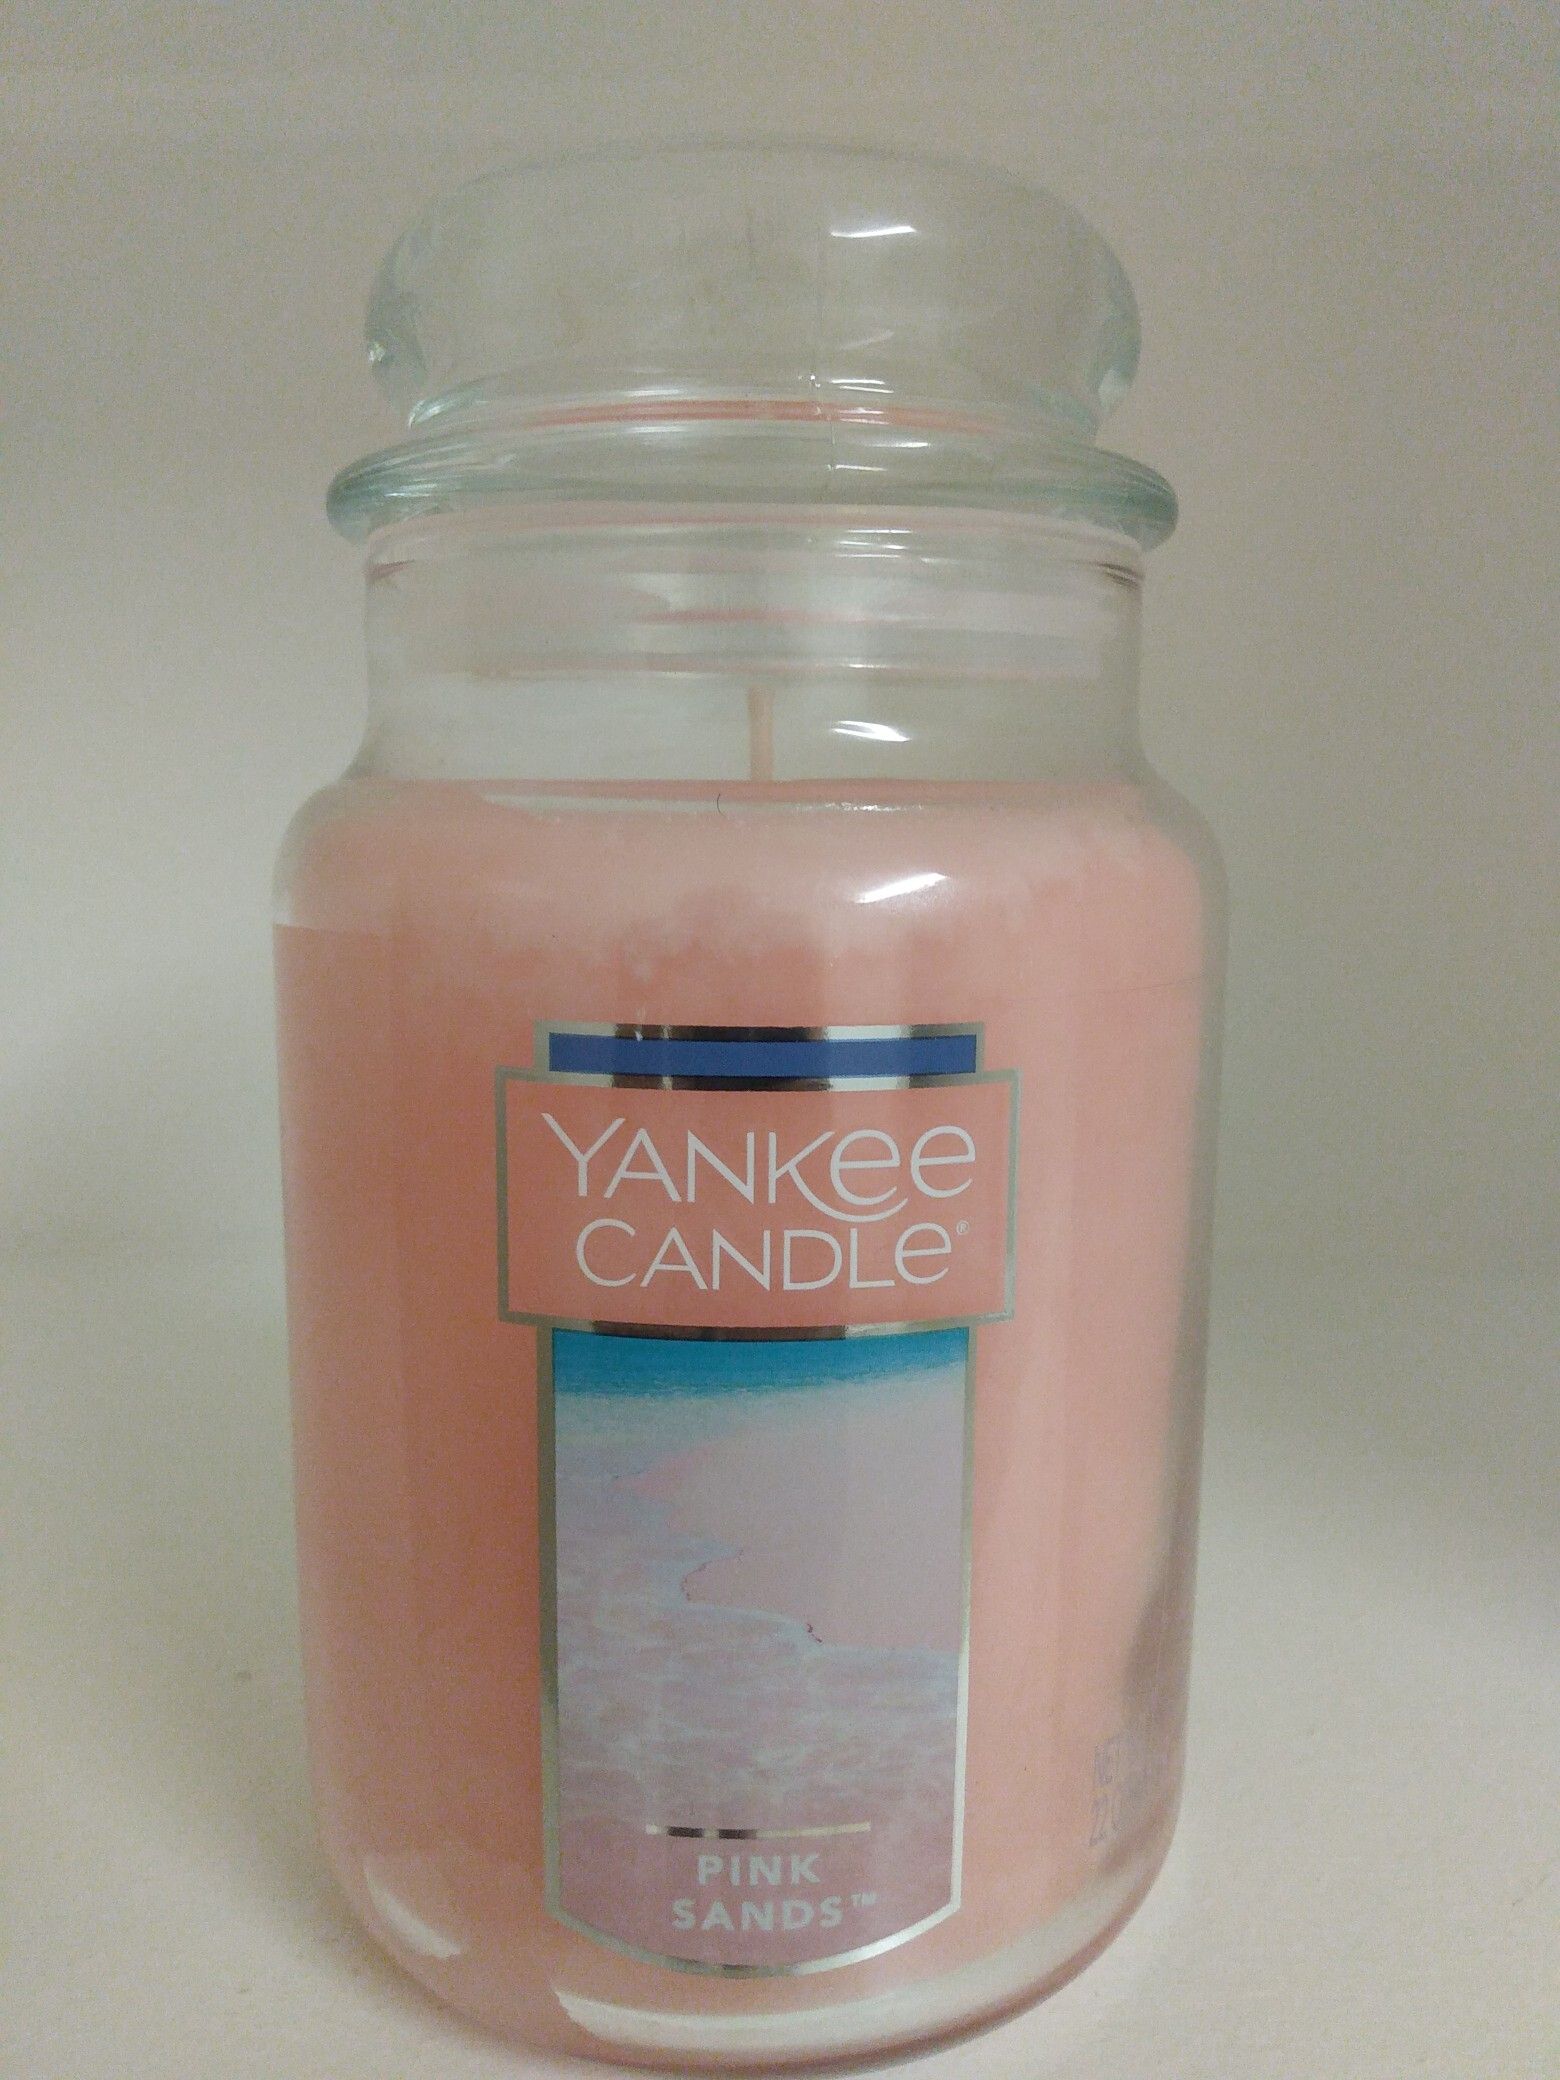 PINK SANDS YANKEE CANDLE